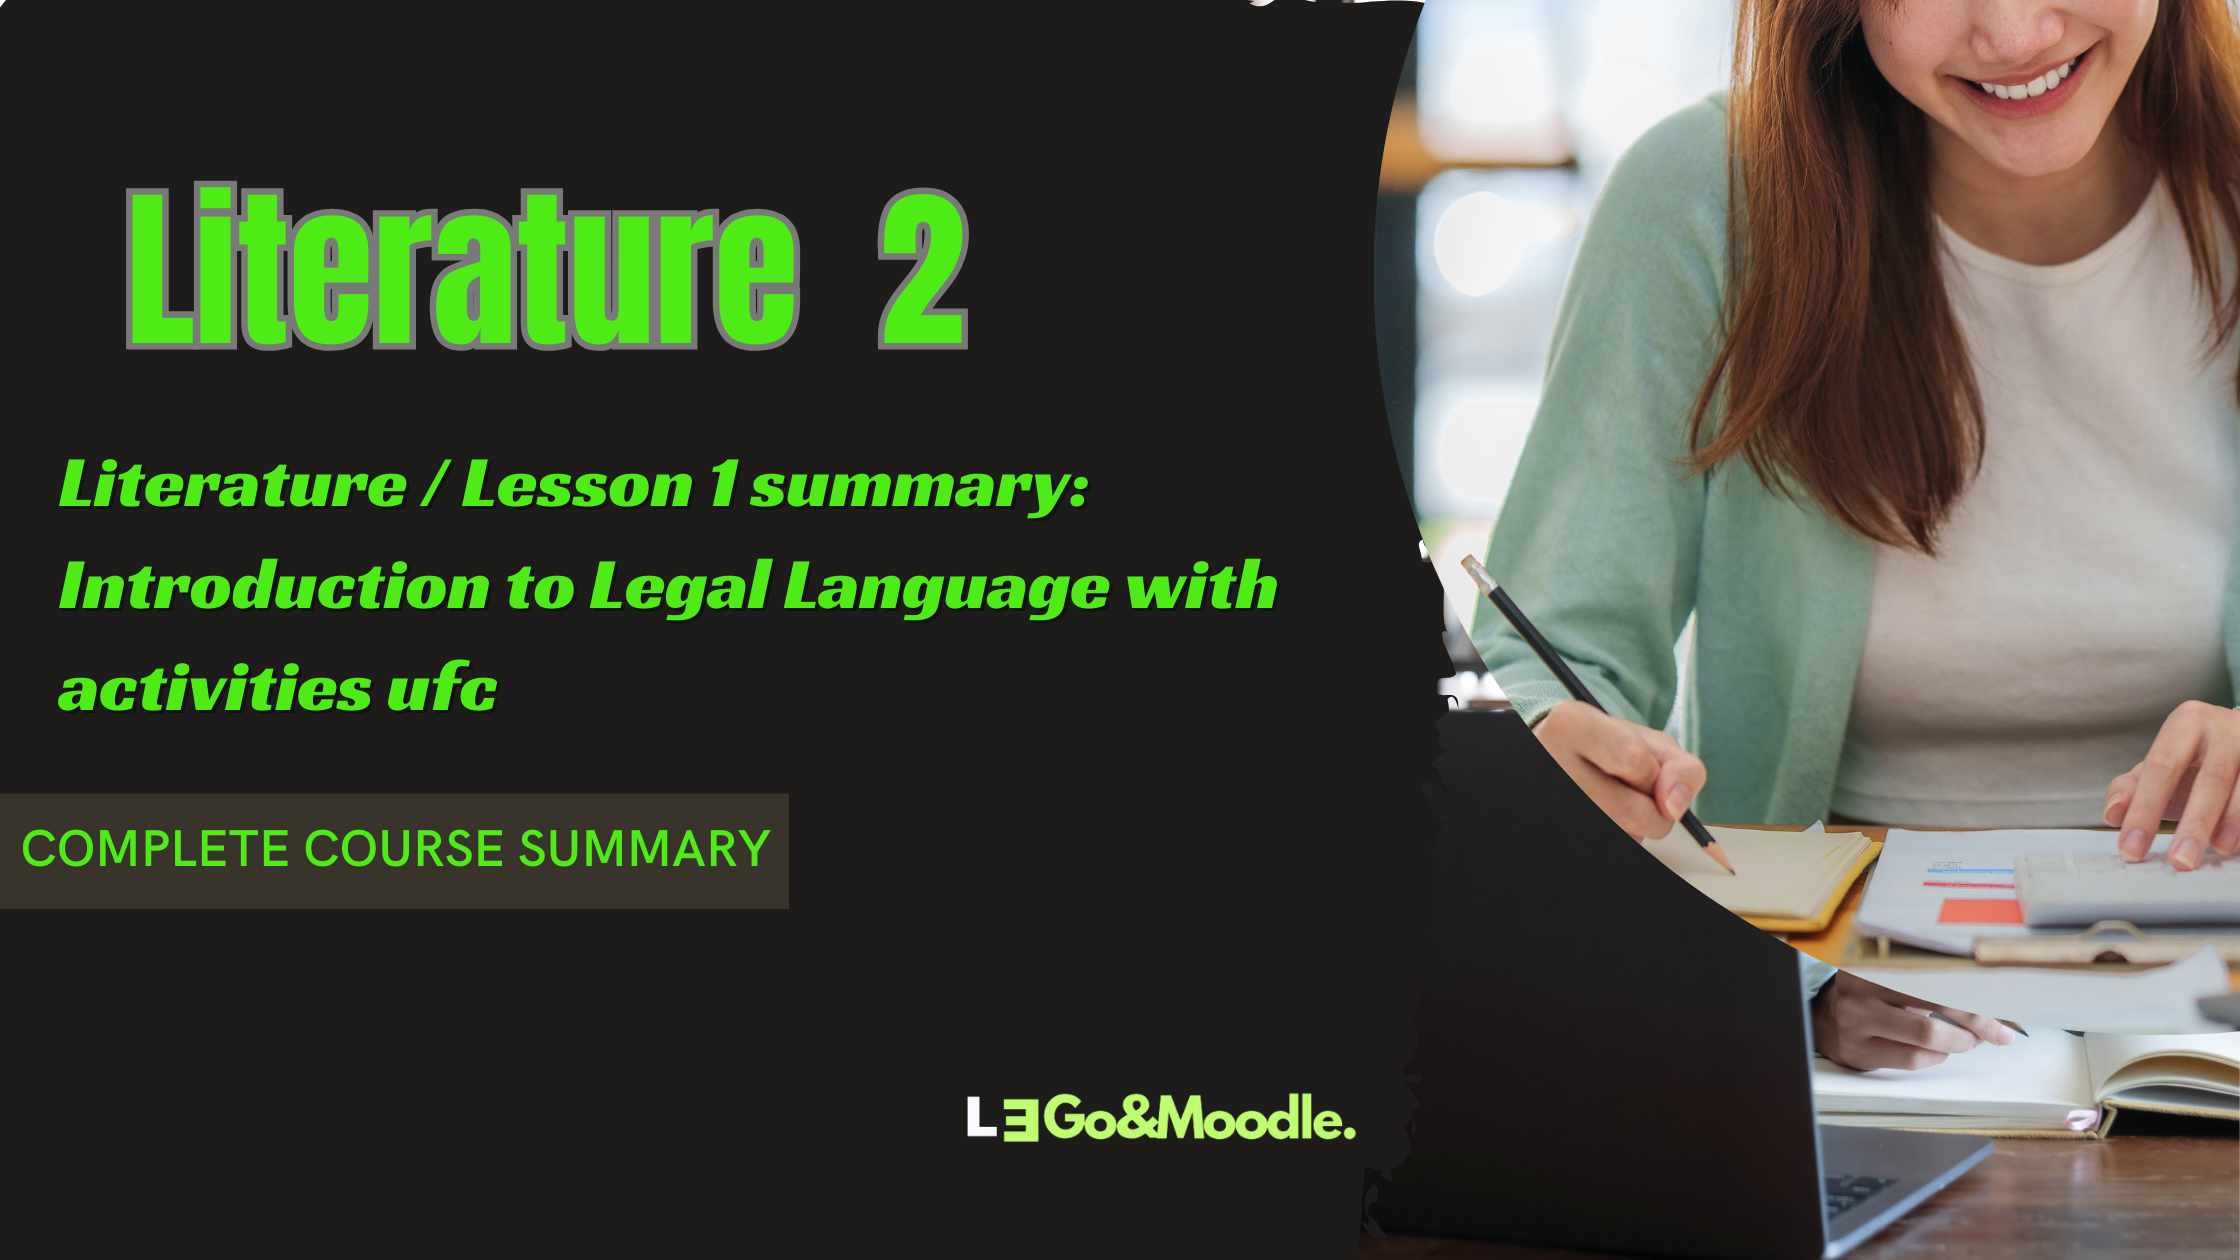 Literature / Lesson 1 summary: Introduction to Legal Language with activities ufc